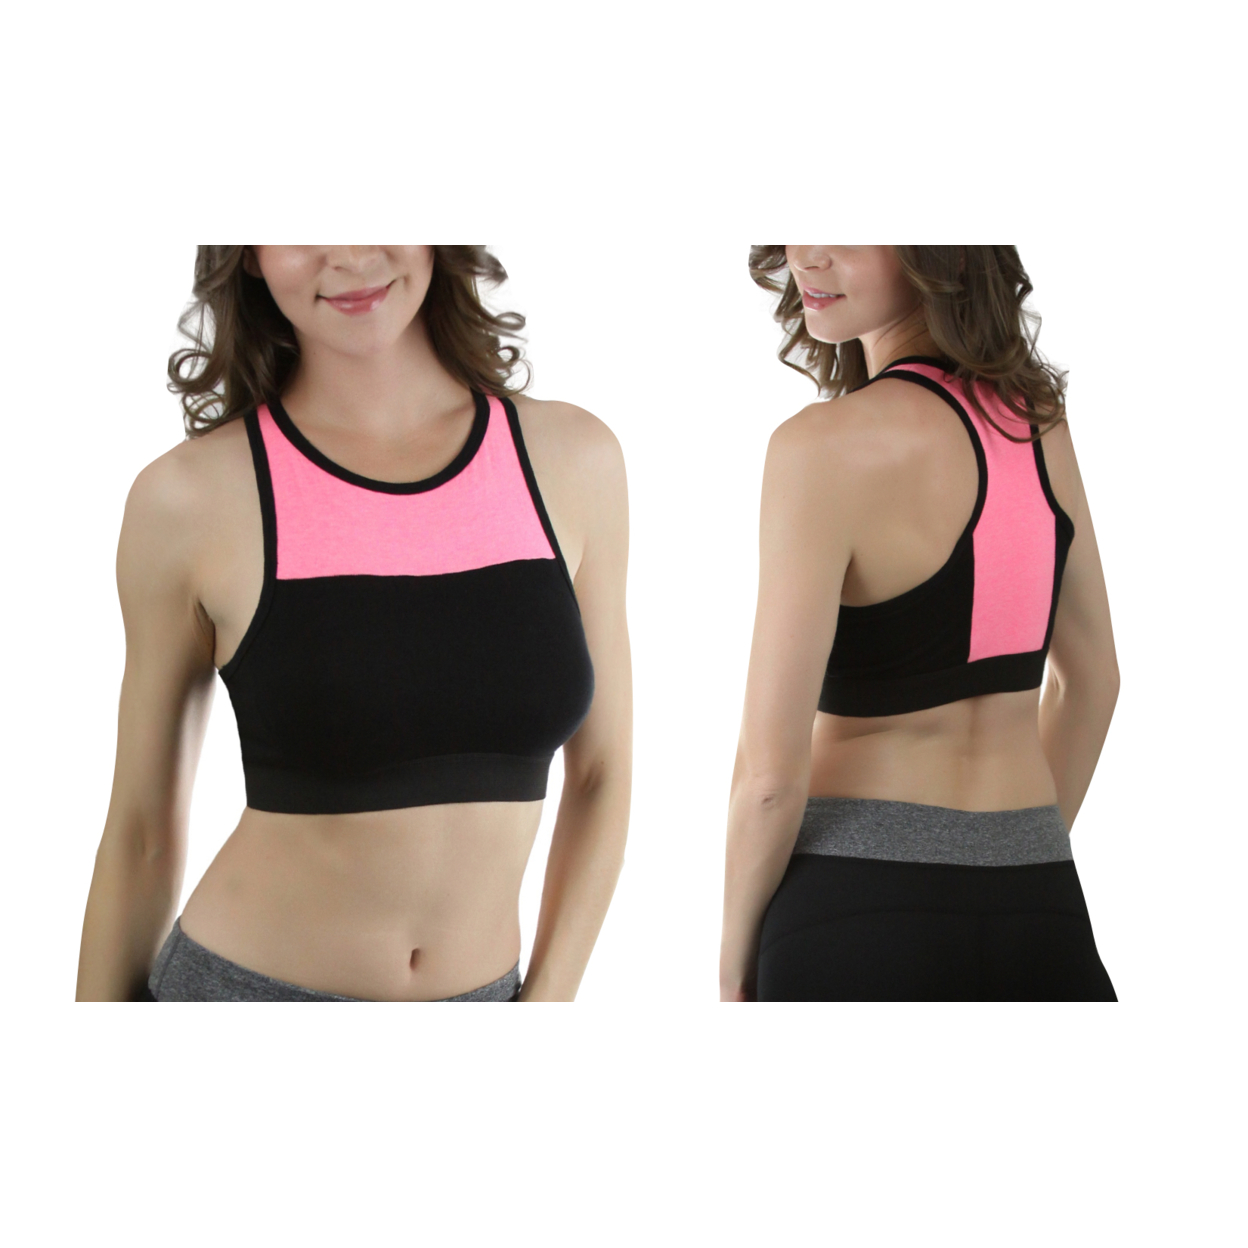 Single Or 2-Pack Of Women's Color-Block Two Tone Cotton-Blend Bra - Black/Neon Pink, Small